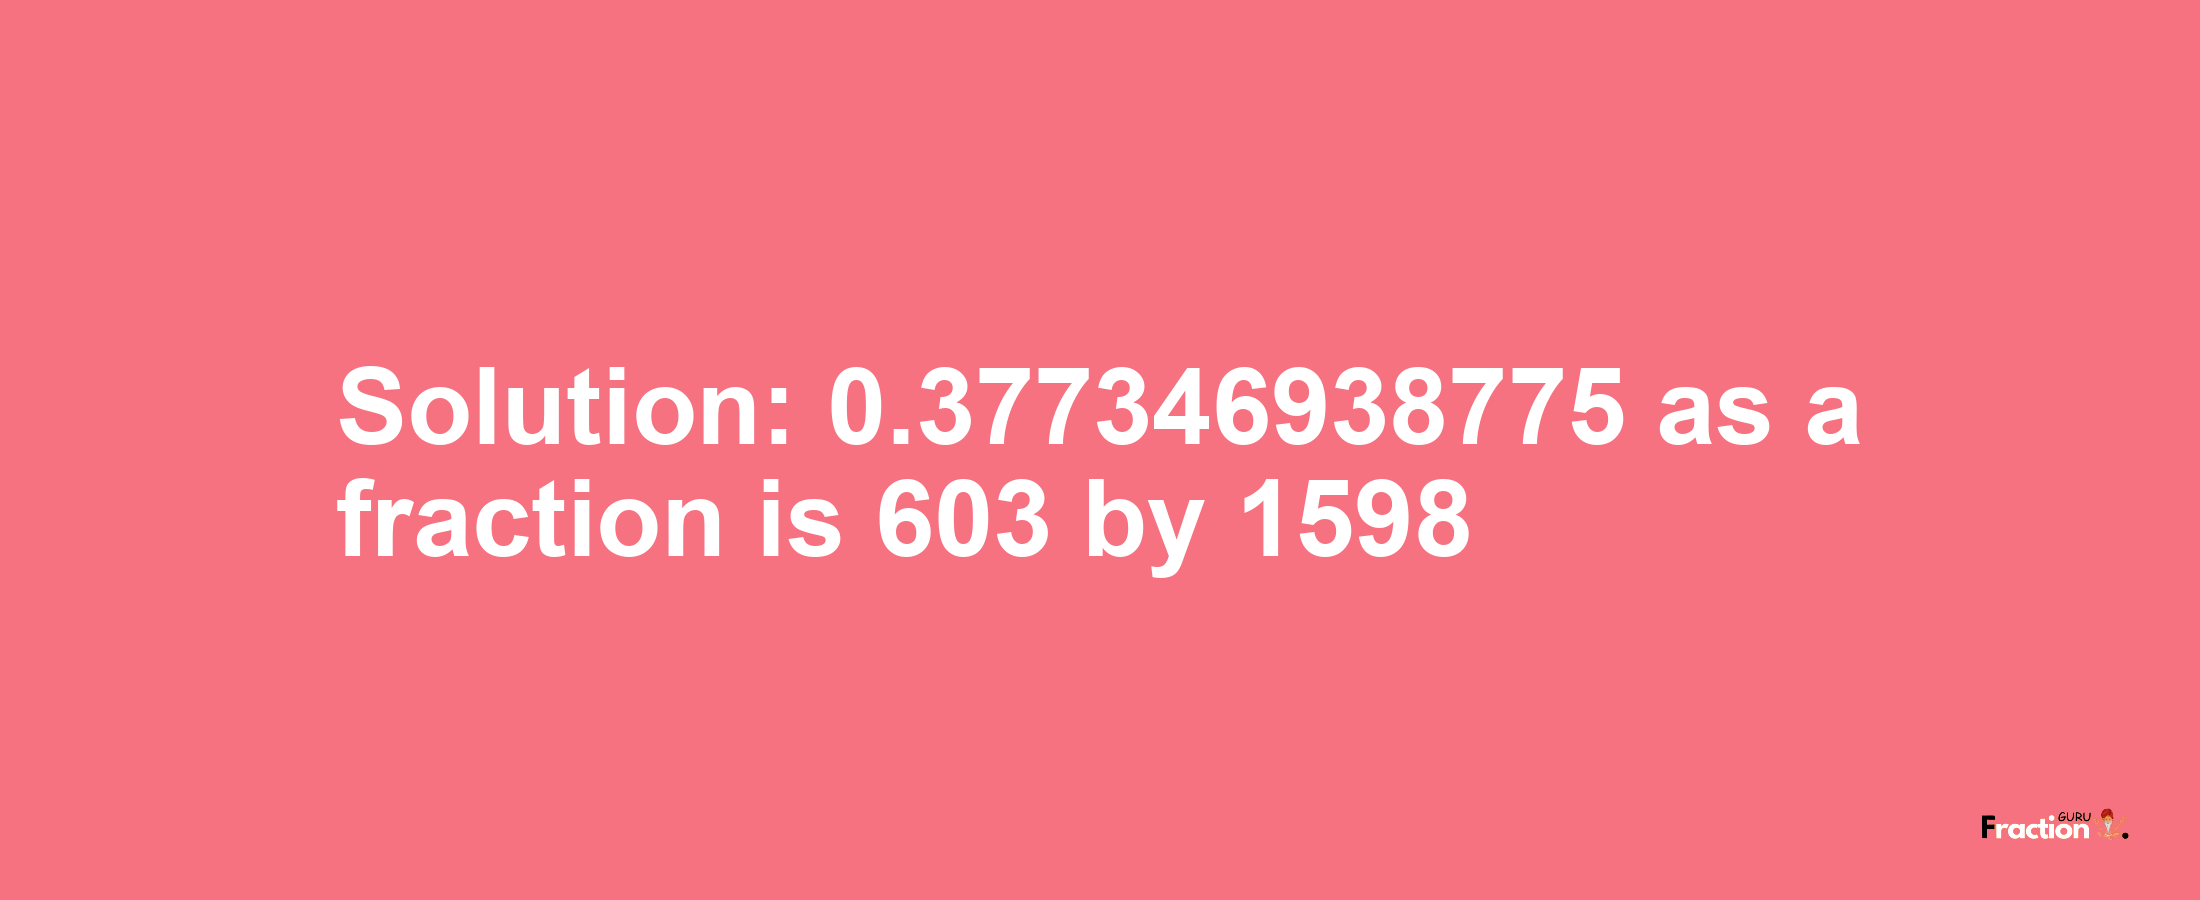 Solution:0.377346938775 as a fraction is 603/1598